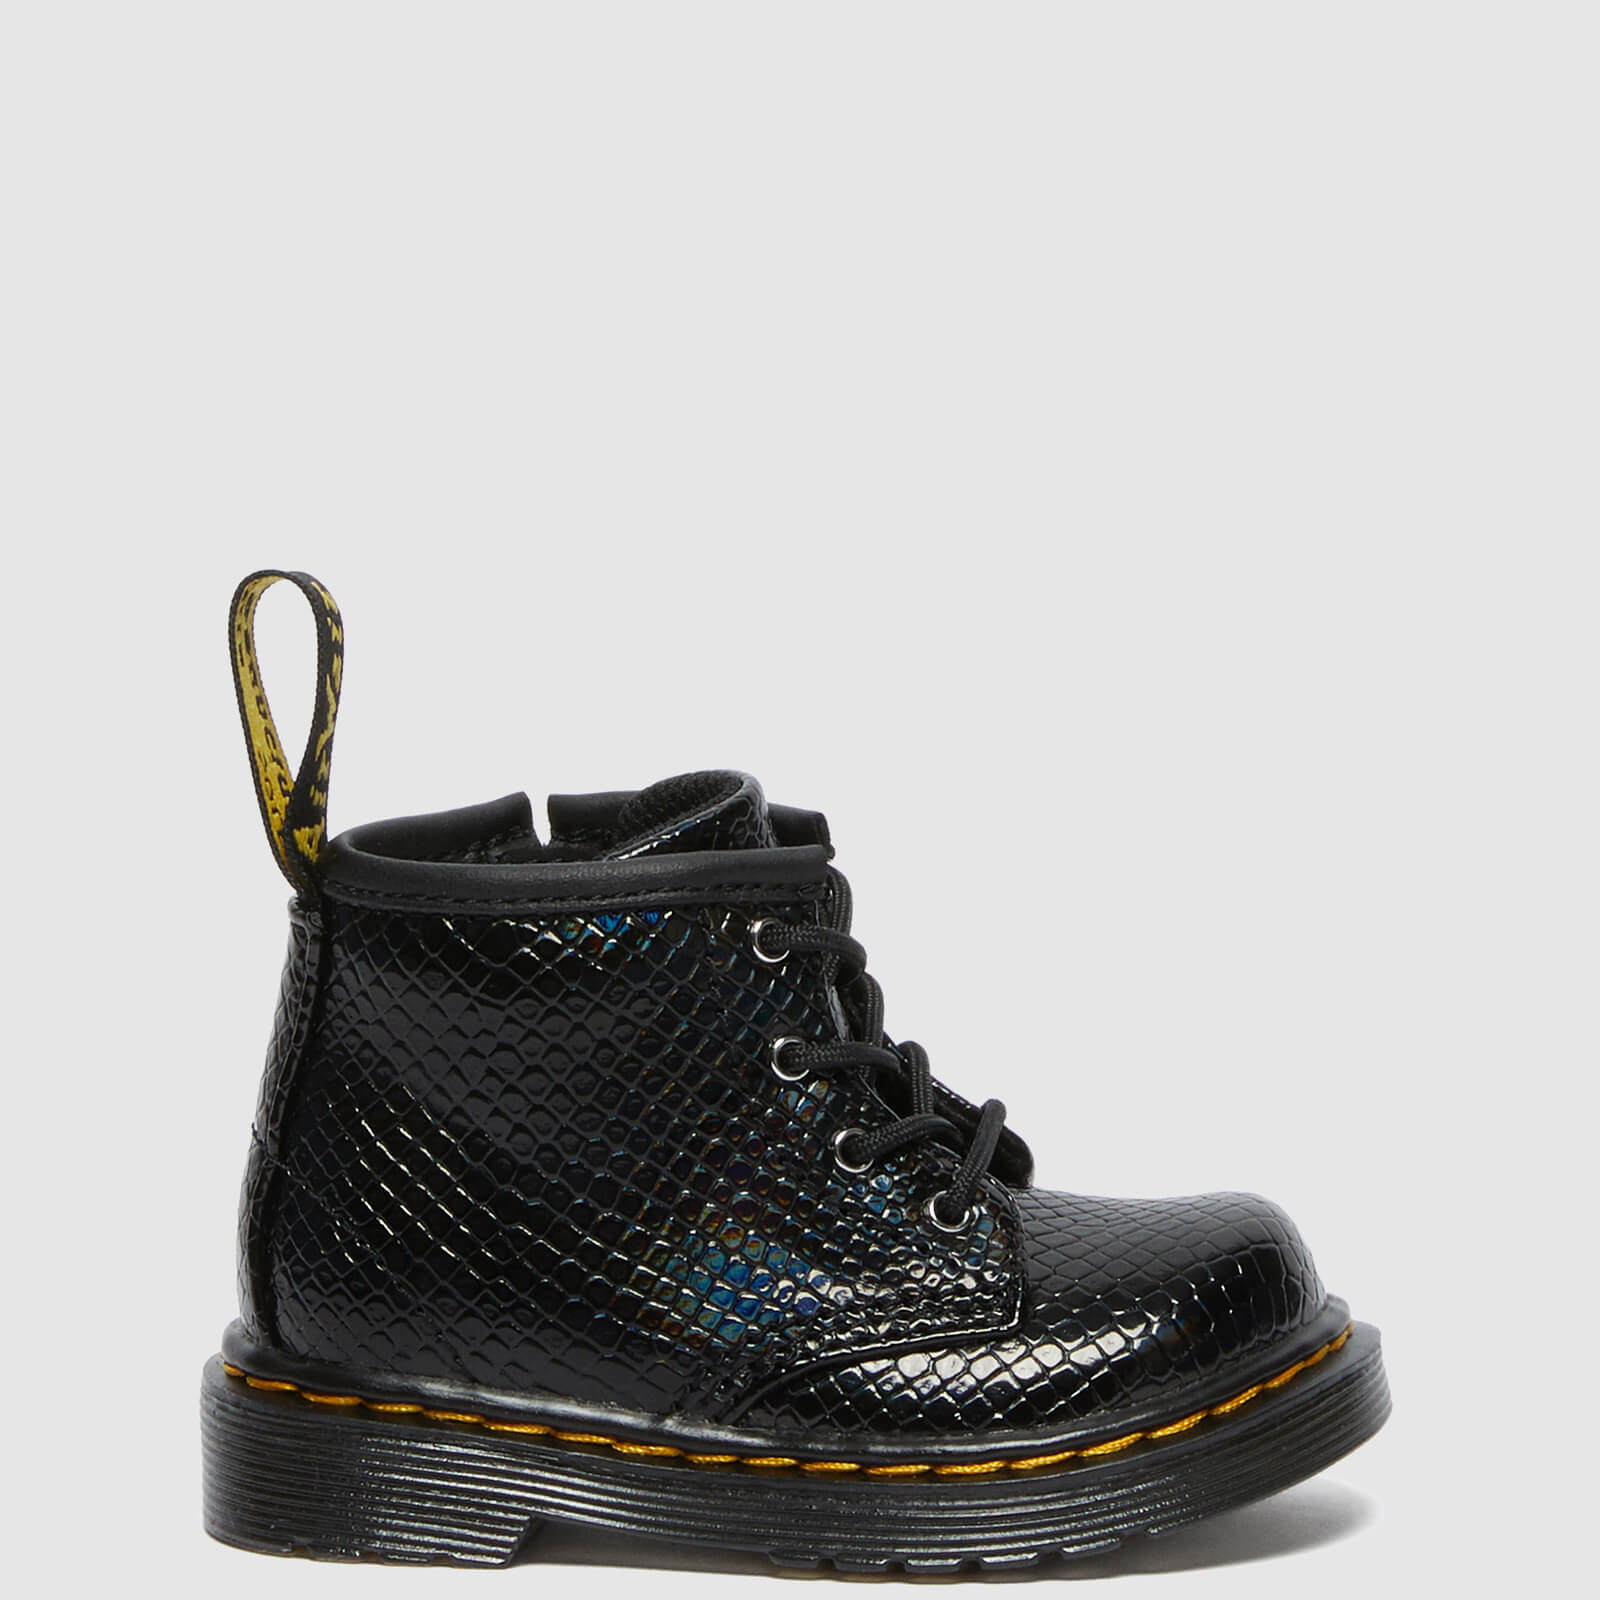 Dr. Martens Babies' 1460 Patent Lamper Lace Up Boots - Black Reptile Emboss - UK 3 Baby